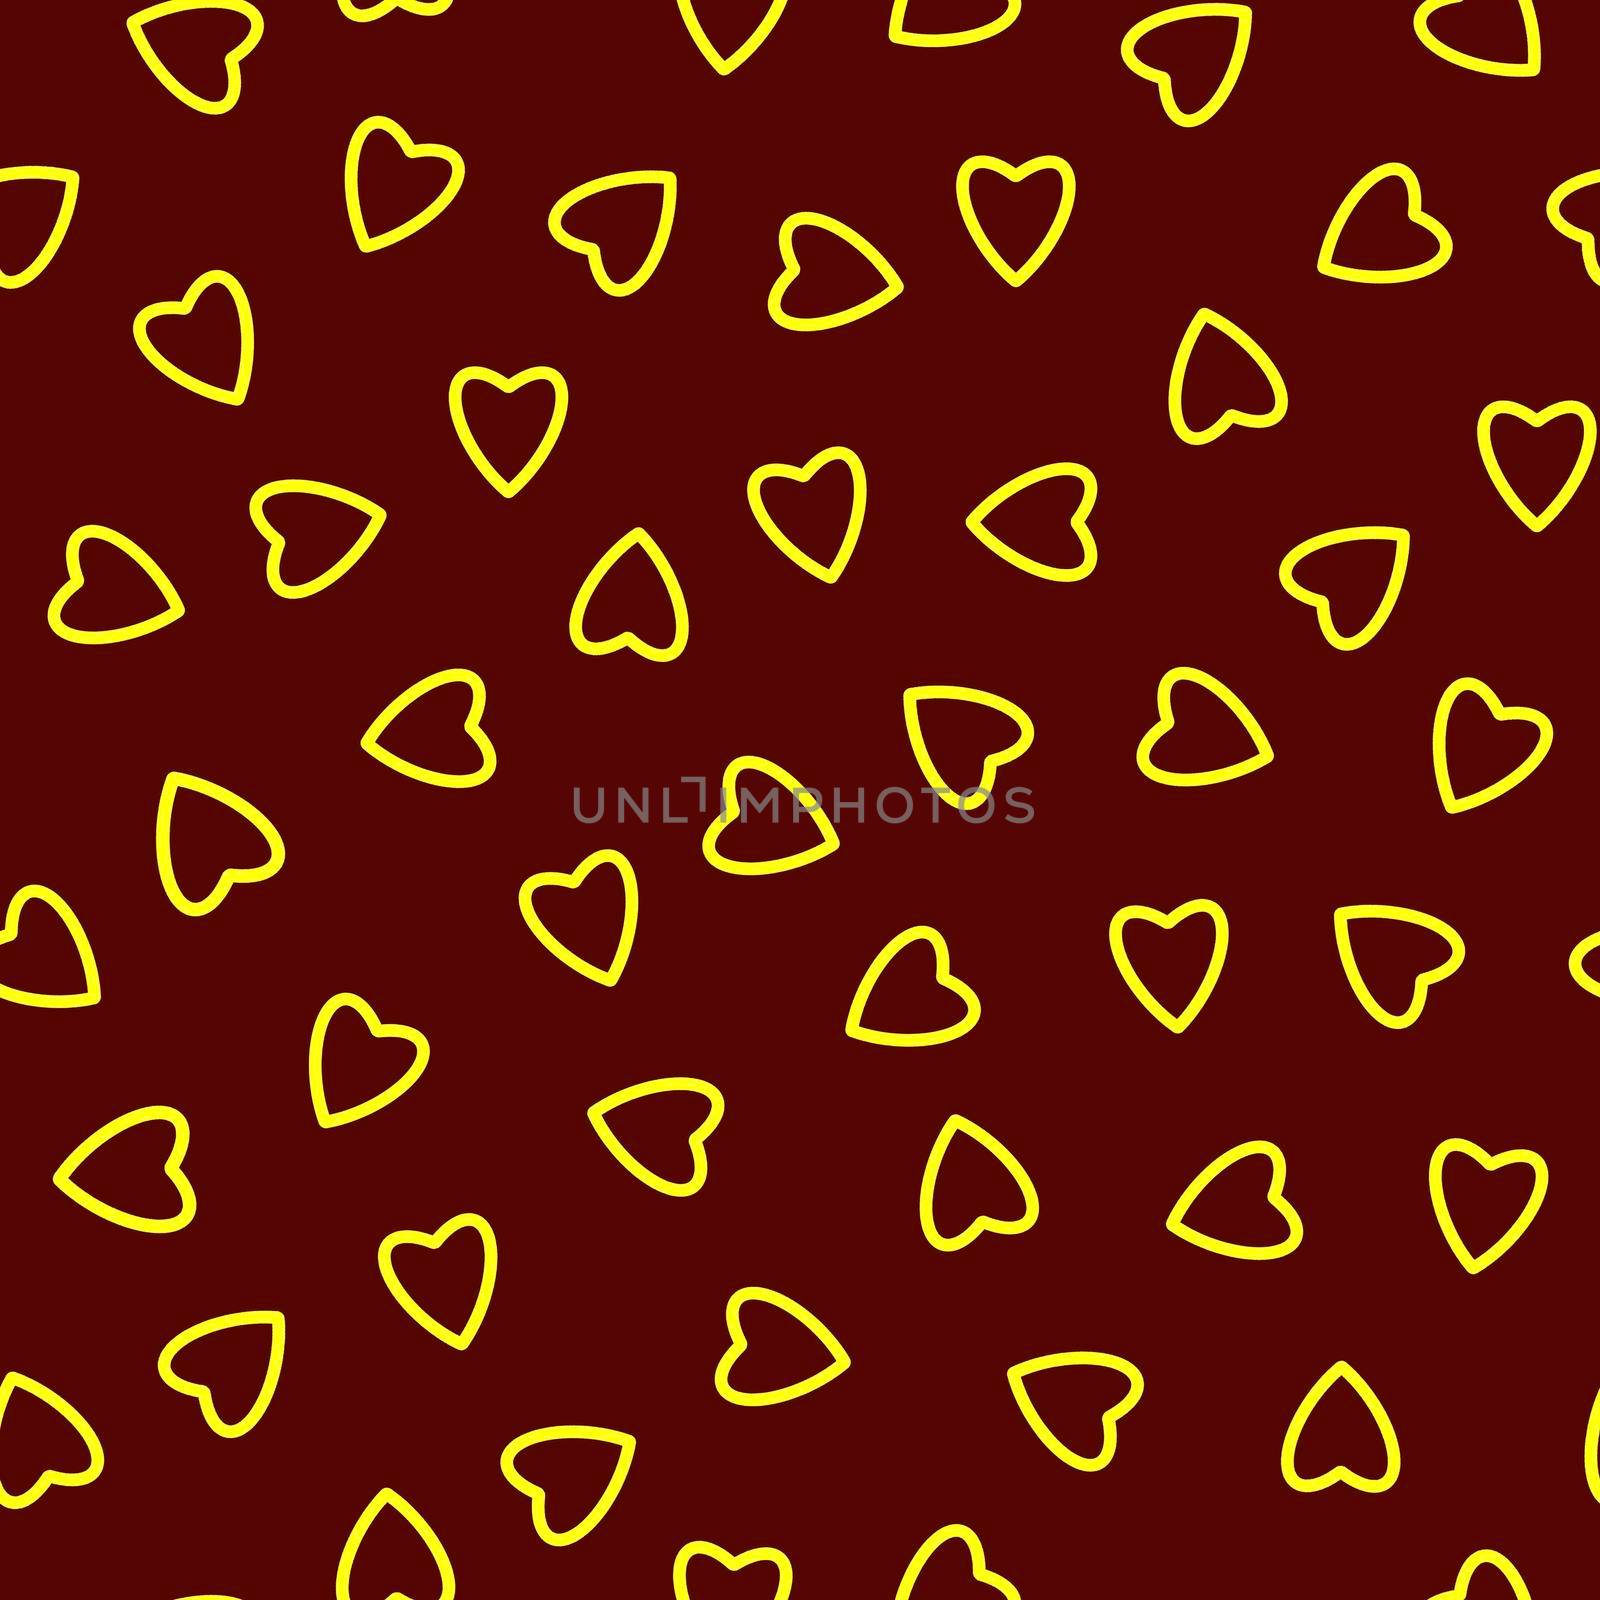 Simple hearts seamless pattern,endless chaotic texture made tiny heart silhouettes.Valentines,mothers day background.Great for Easter,wedding,scrapbook,gift wrapping paper,textiles.Yellow on burgundy by Angelsmoon